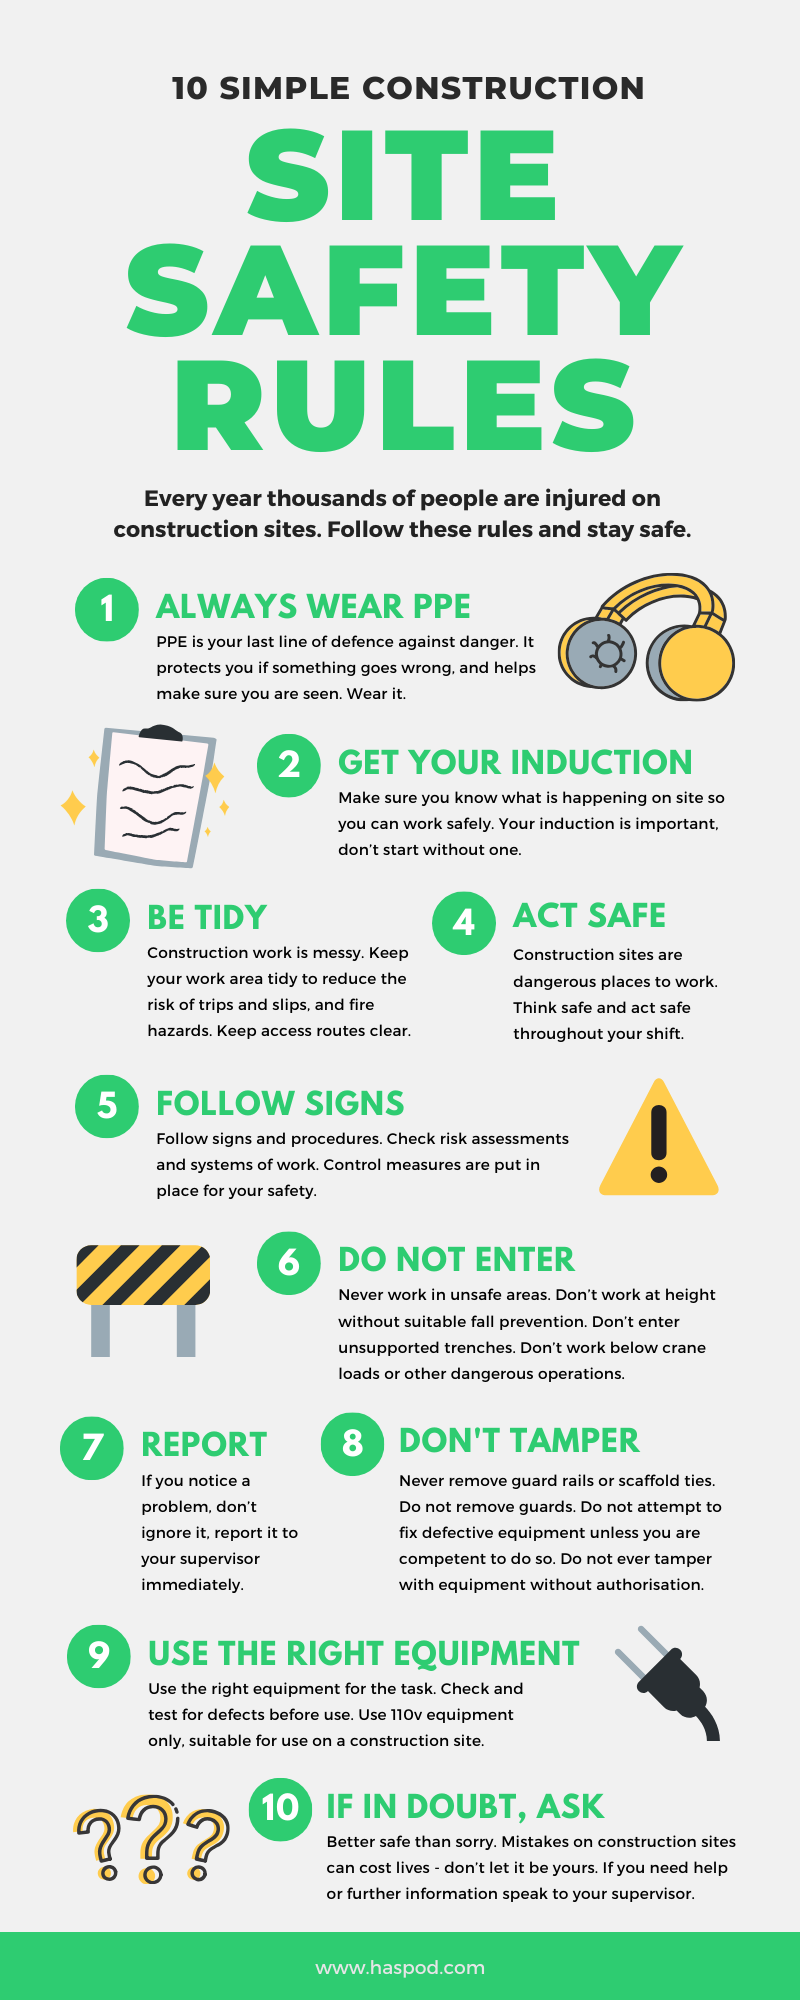 10 simple construction site safety rules infographic